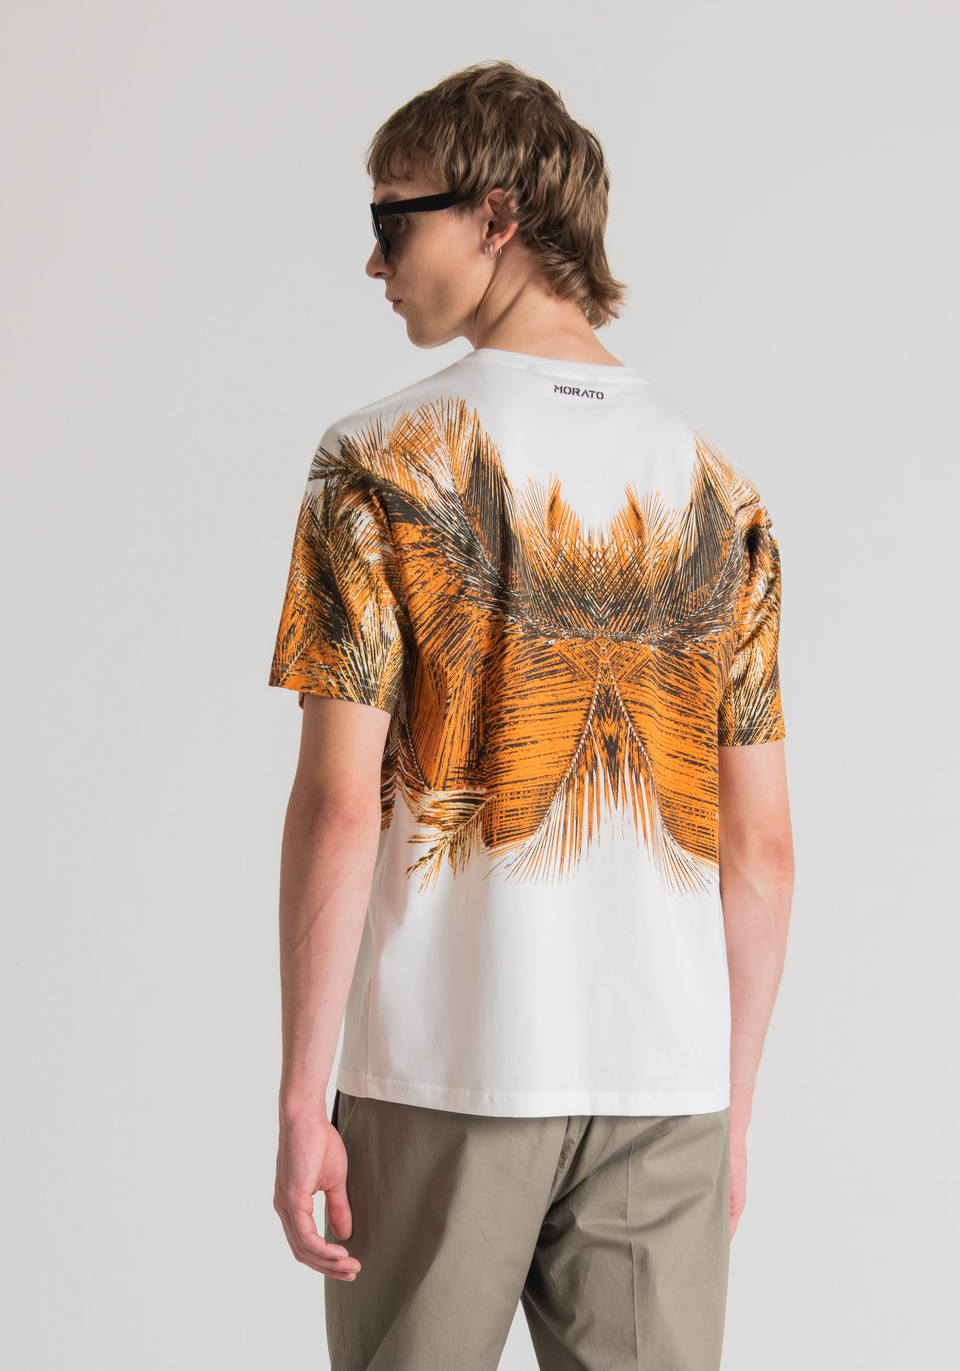 REGULAR-FIT T-SHIRT IN PURE COTTON WITH PALM PRINT - Antony Morato Online Shop